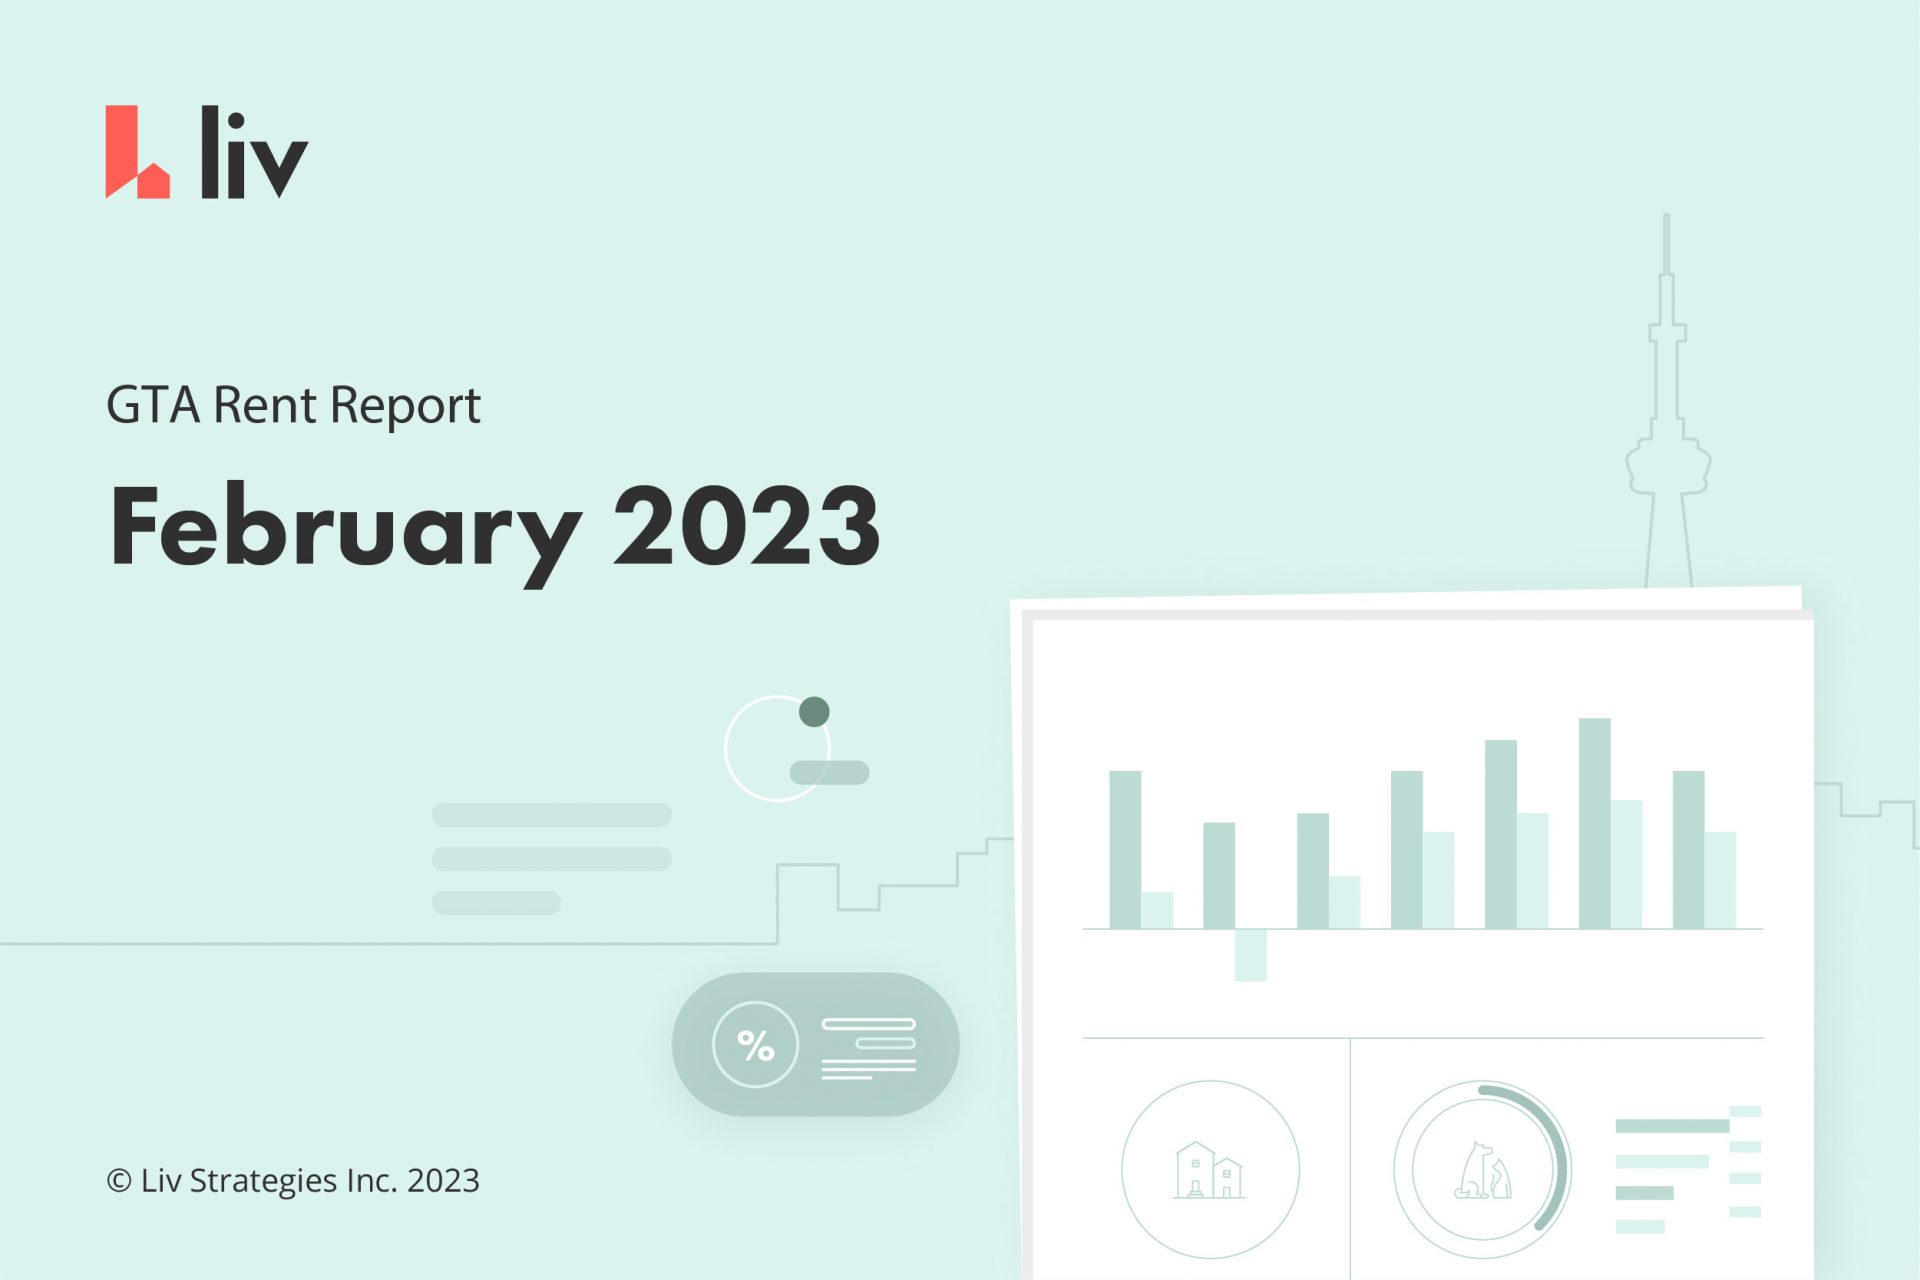 liv.rent's February 2023 rent report for the Greater Toronto Area - statistics, data and more